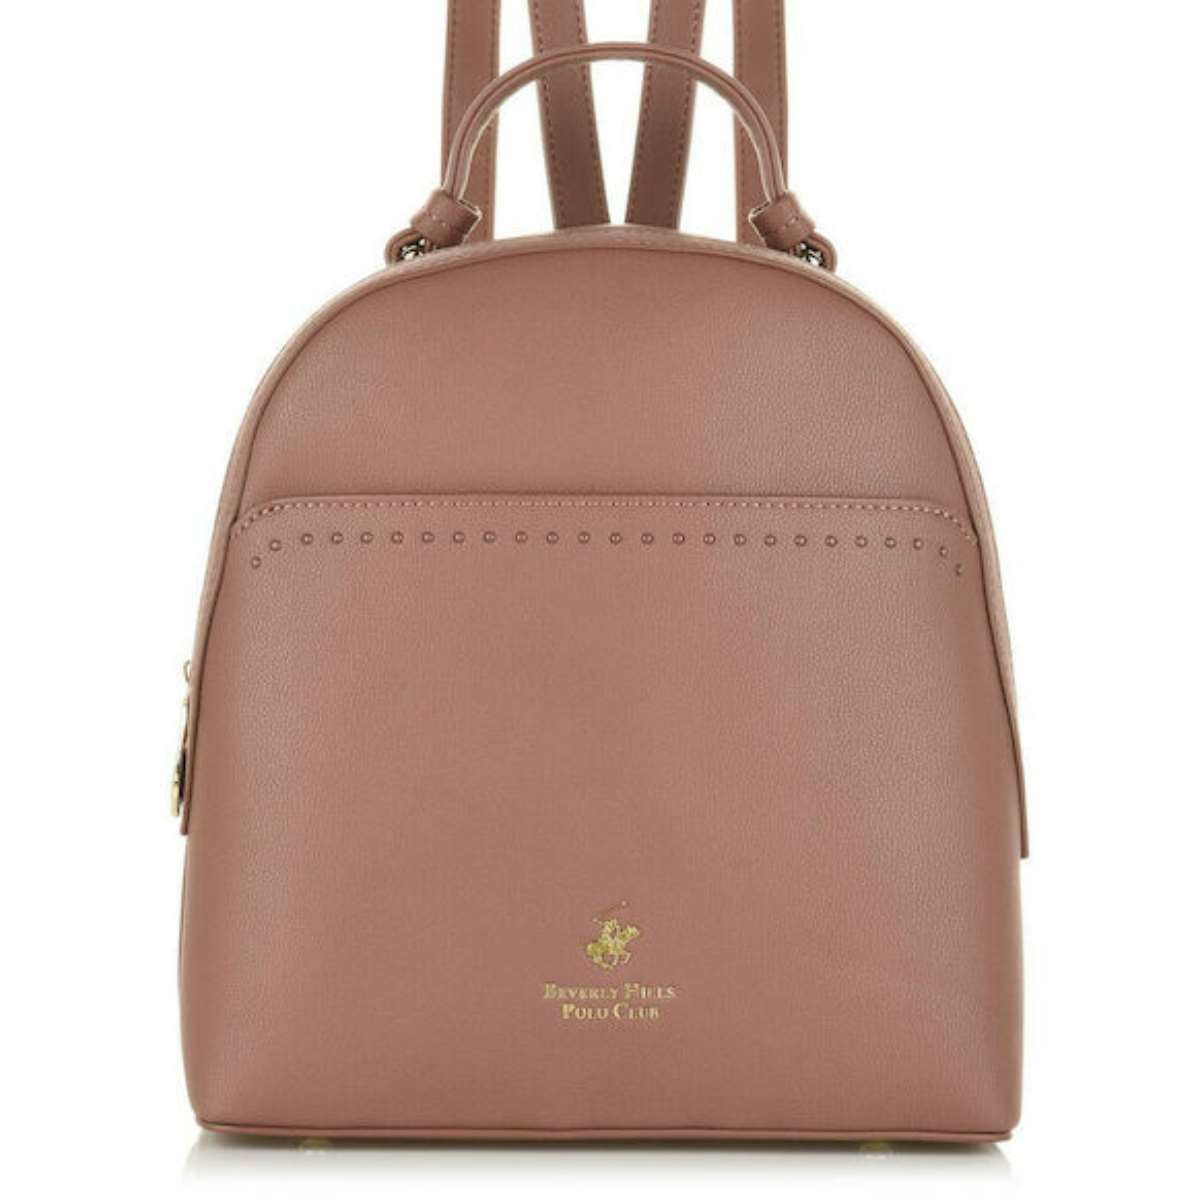 Beverly Hills Polo Club BH-3082 Backpack - Beauty & Beyond